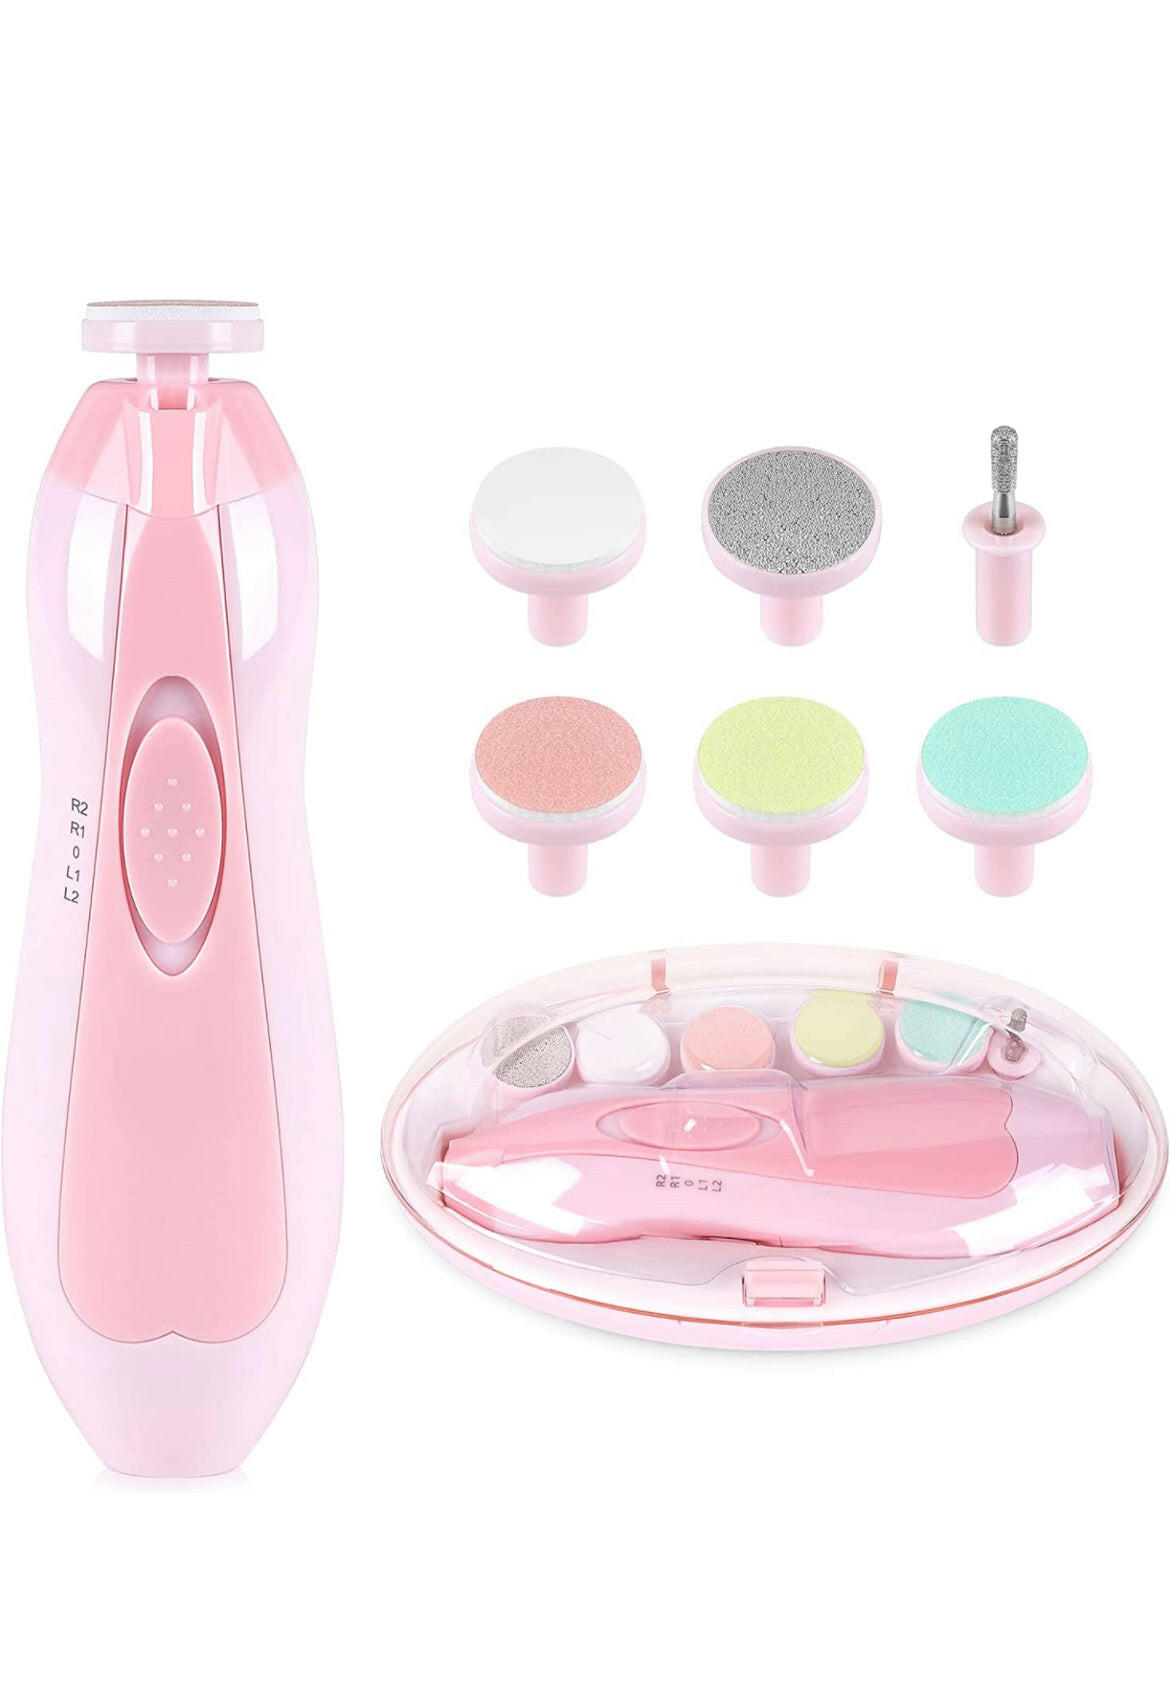 Baby Electric Nail Trimmer Manicure Set with LED Light- Pink.